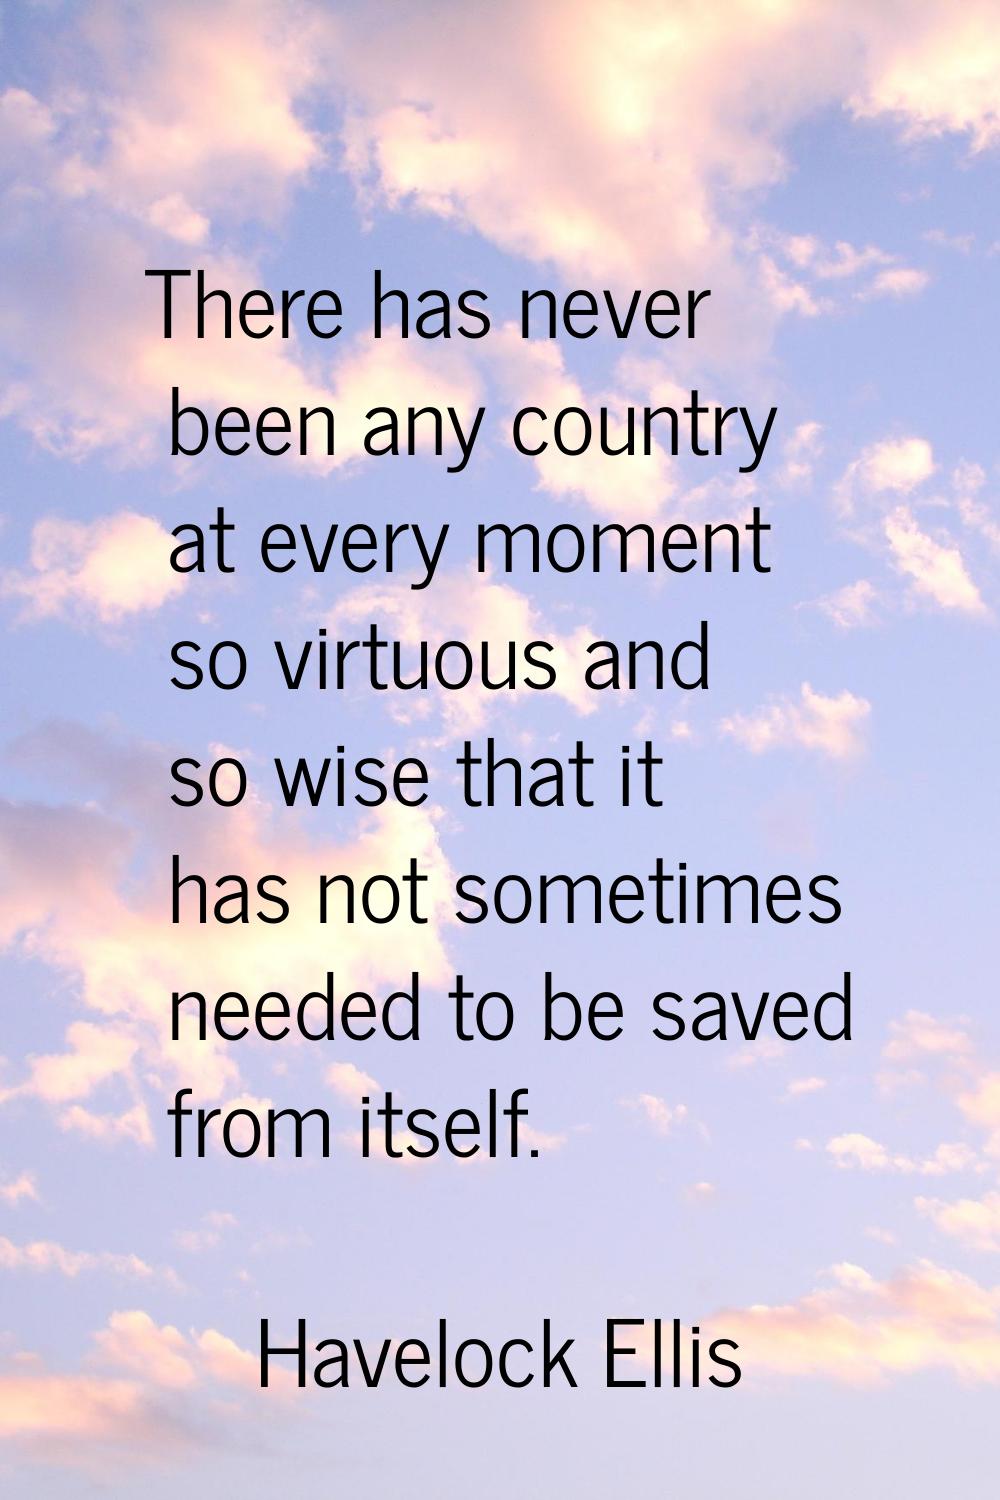 There has never been any country at every moment so virtuous and so wise that it has not sometimes 